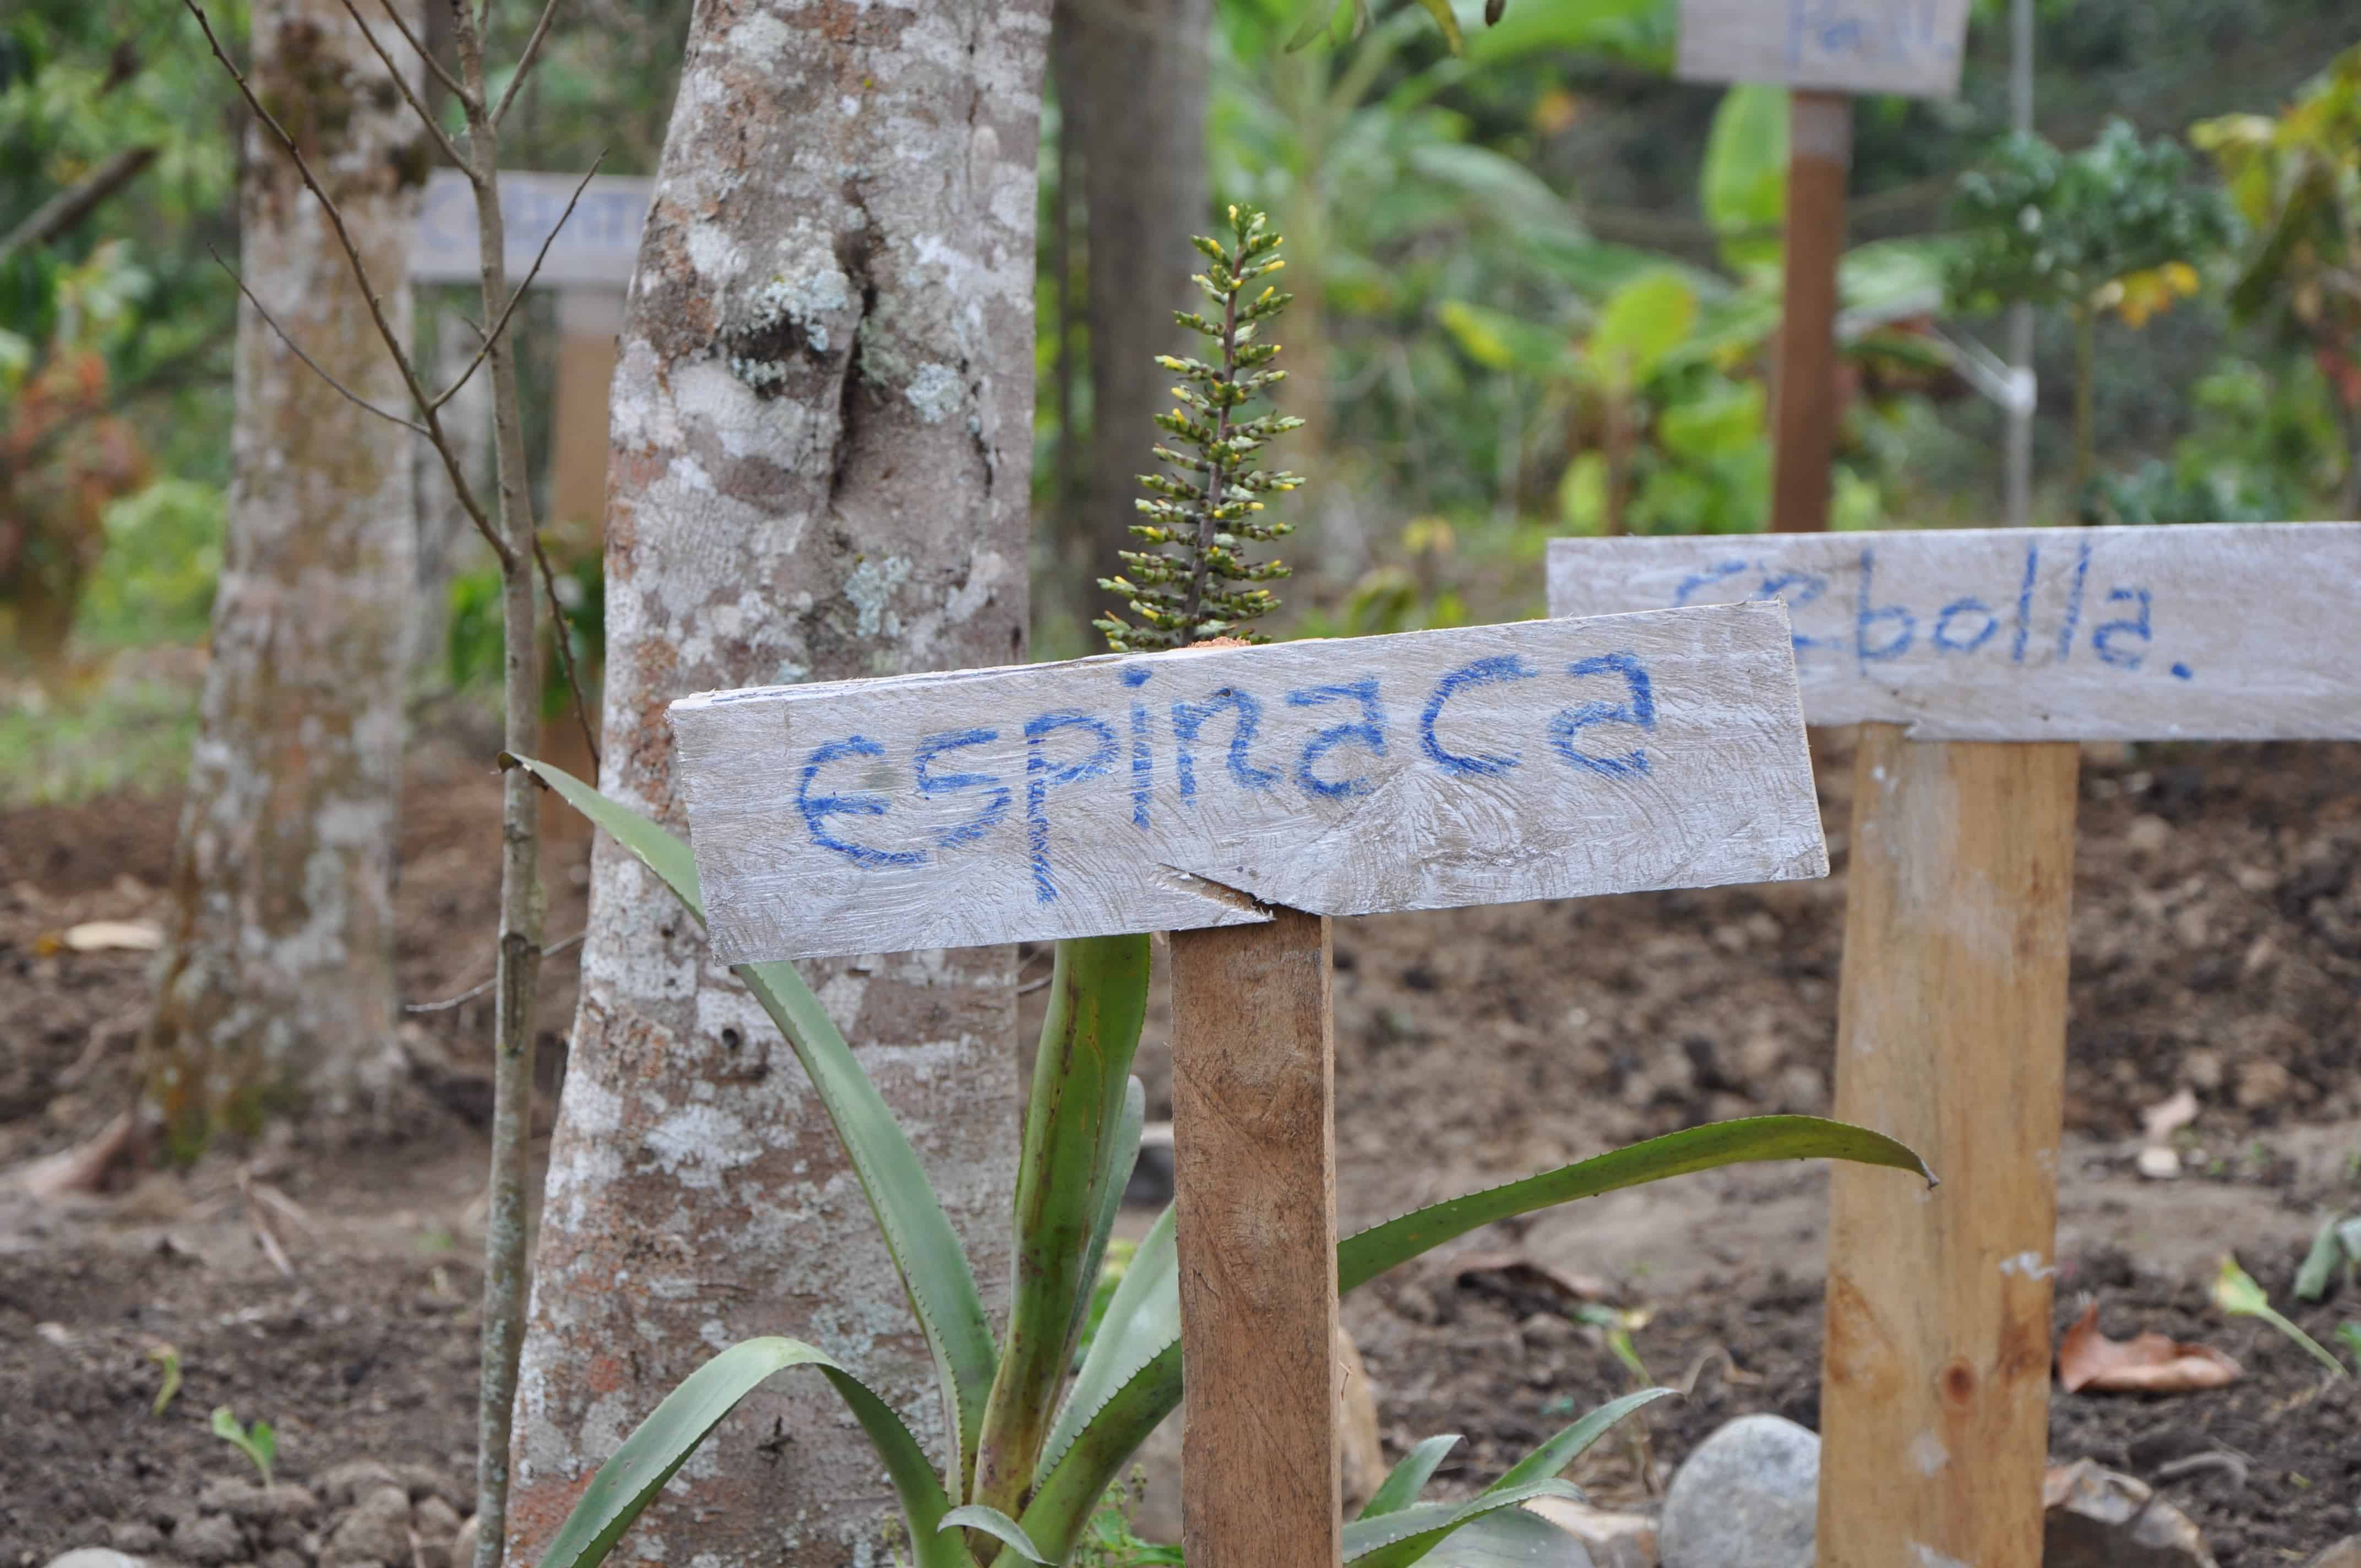 A sign in the vegetable garden that says 'spinach'